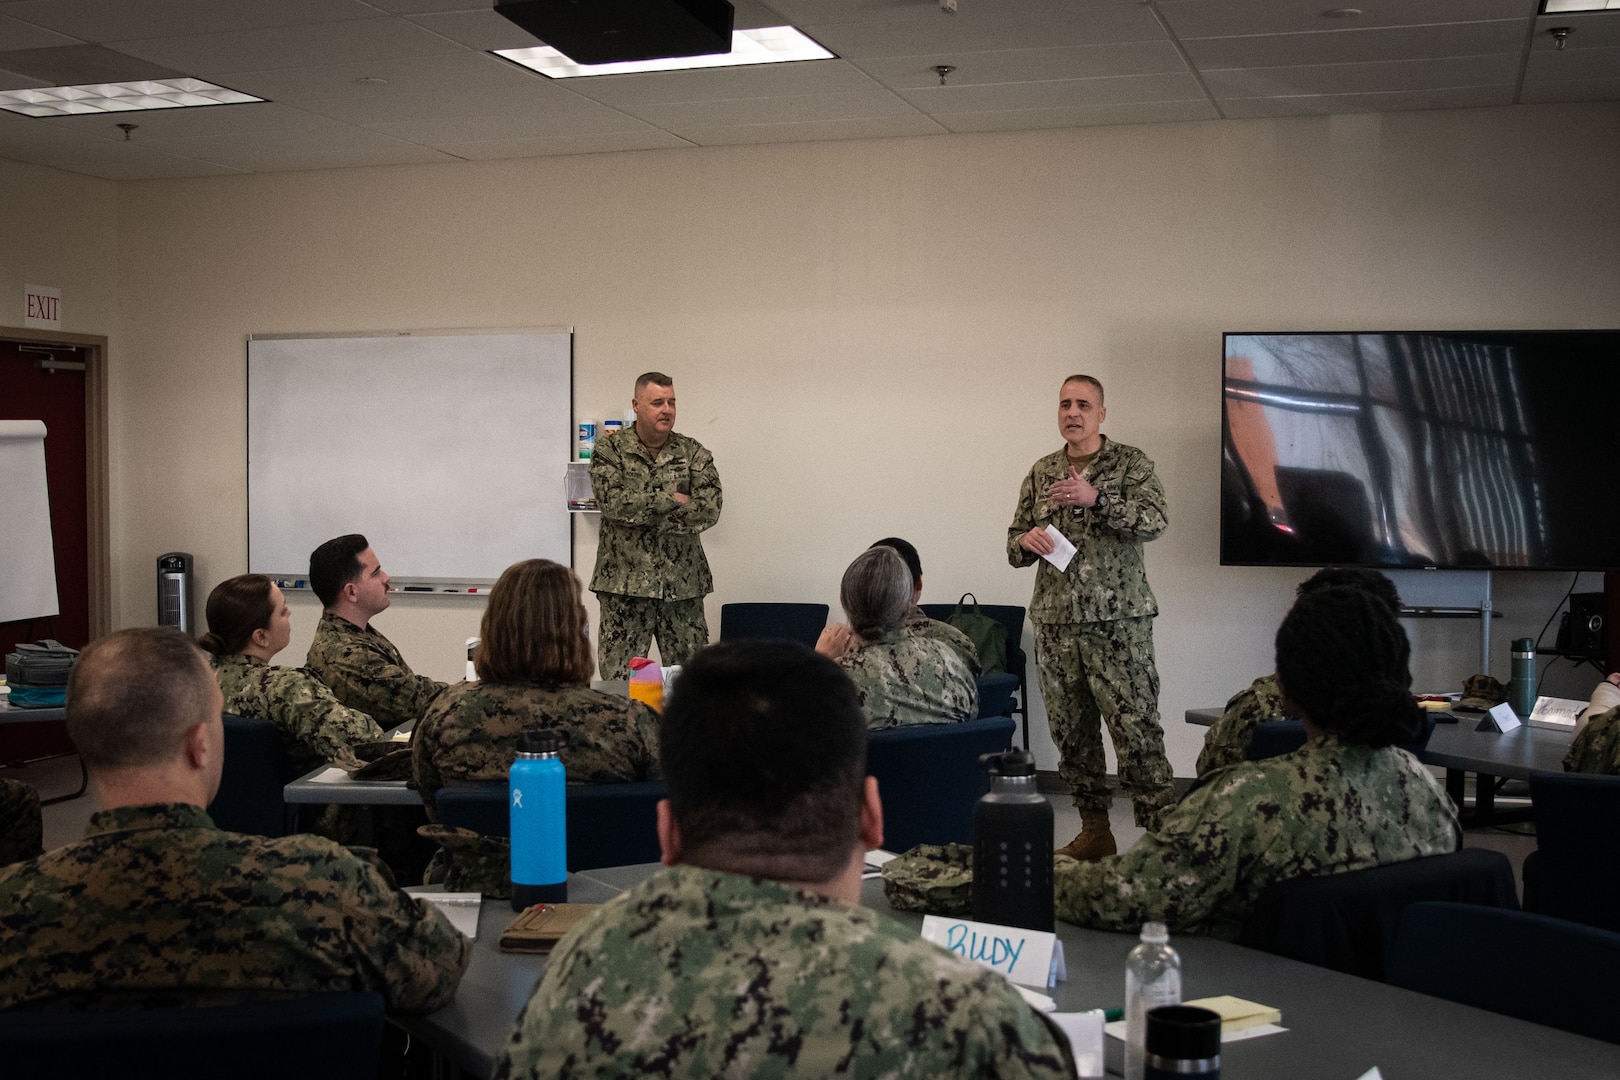 Navy Capt. Kevin Brown, Commander and Director of Naval Medical Center Camp Lejeune, speaks to Navy Officers serving aboard Marine Corps Air Station Cherry Point attending Intermediate Leadership Course on Feb. 15, 2024. The course is a multi-day training program intended to prepare intermediate Naval Officers for challenges they will face in future duty assignments.